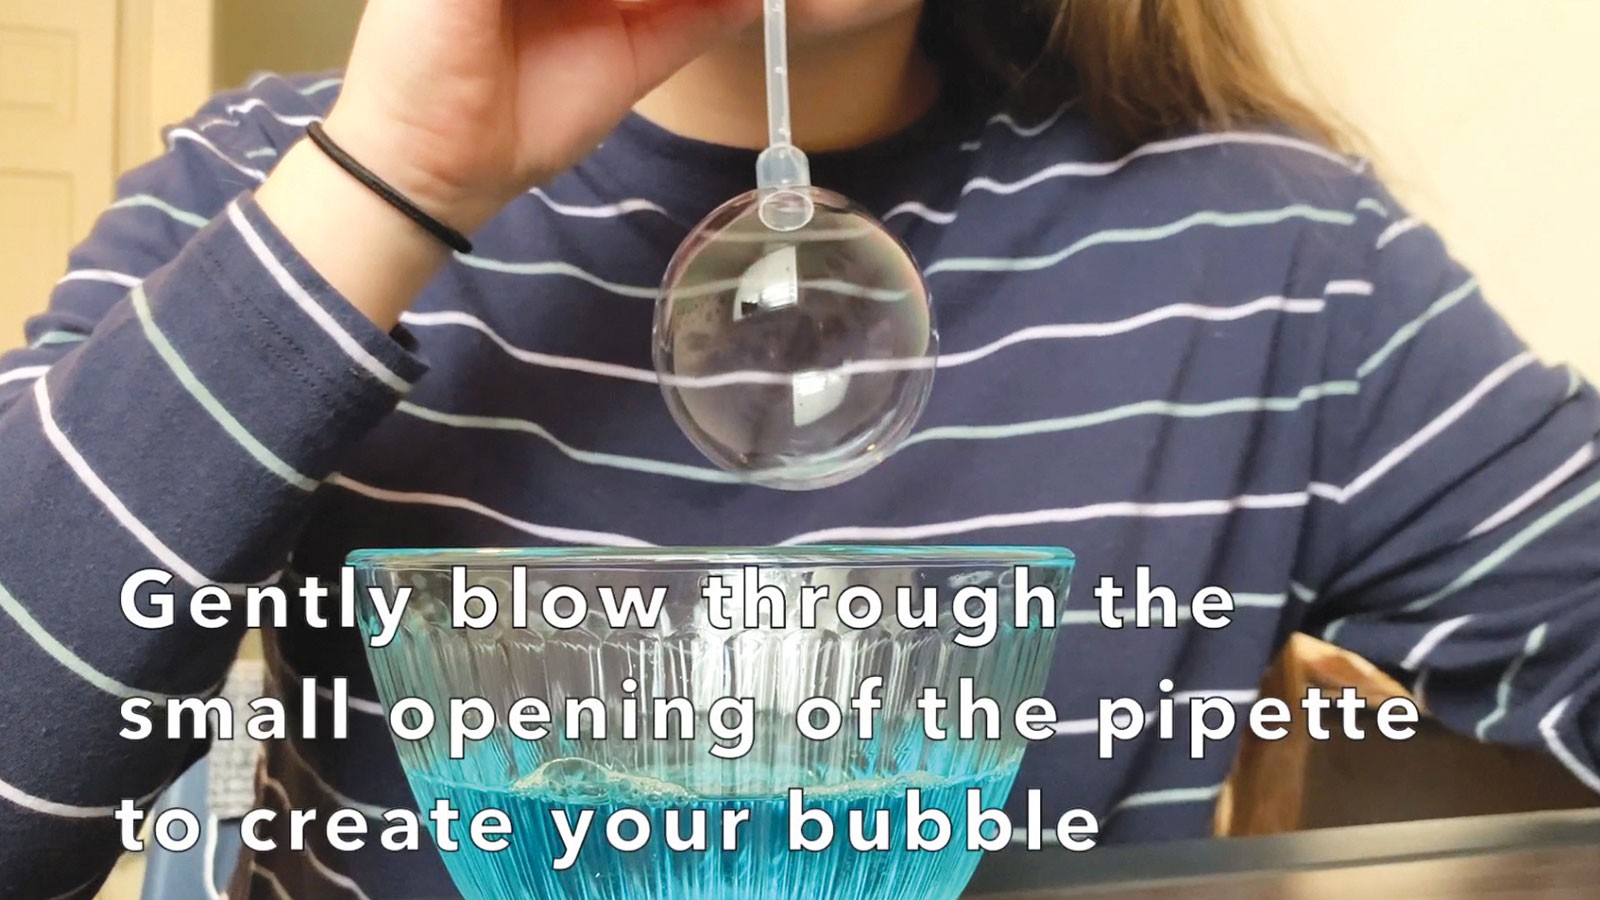 A learning video shows instructions for blowing a bubble as part of a science experiment.